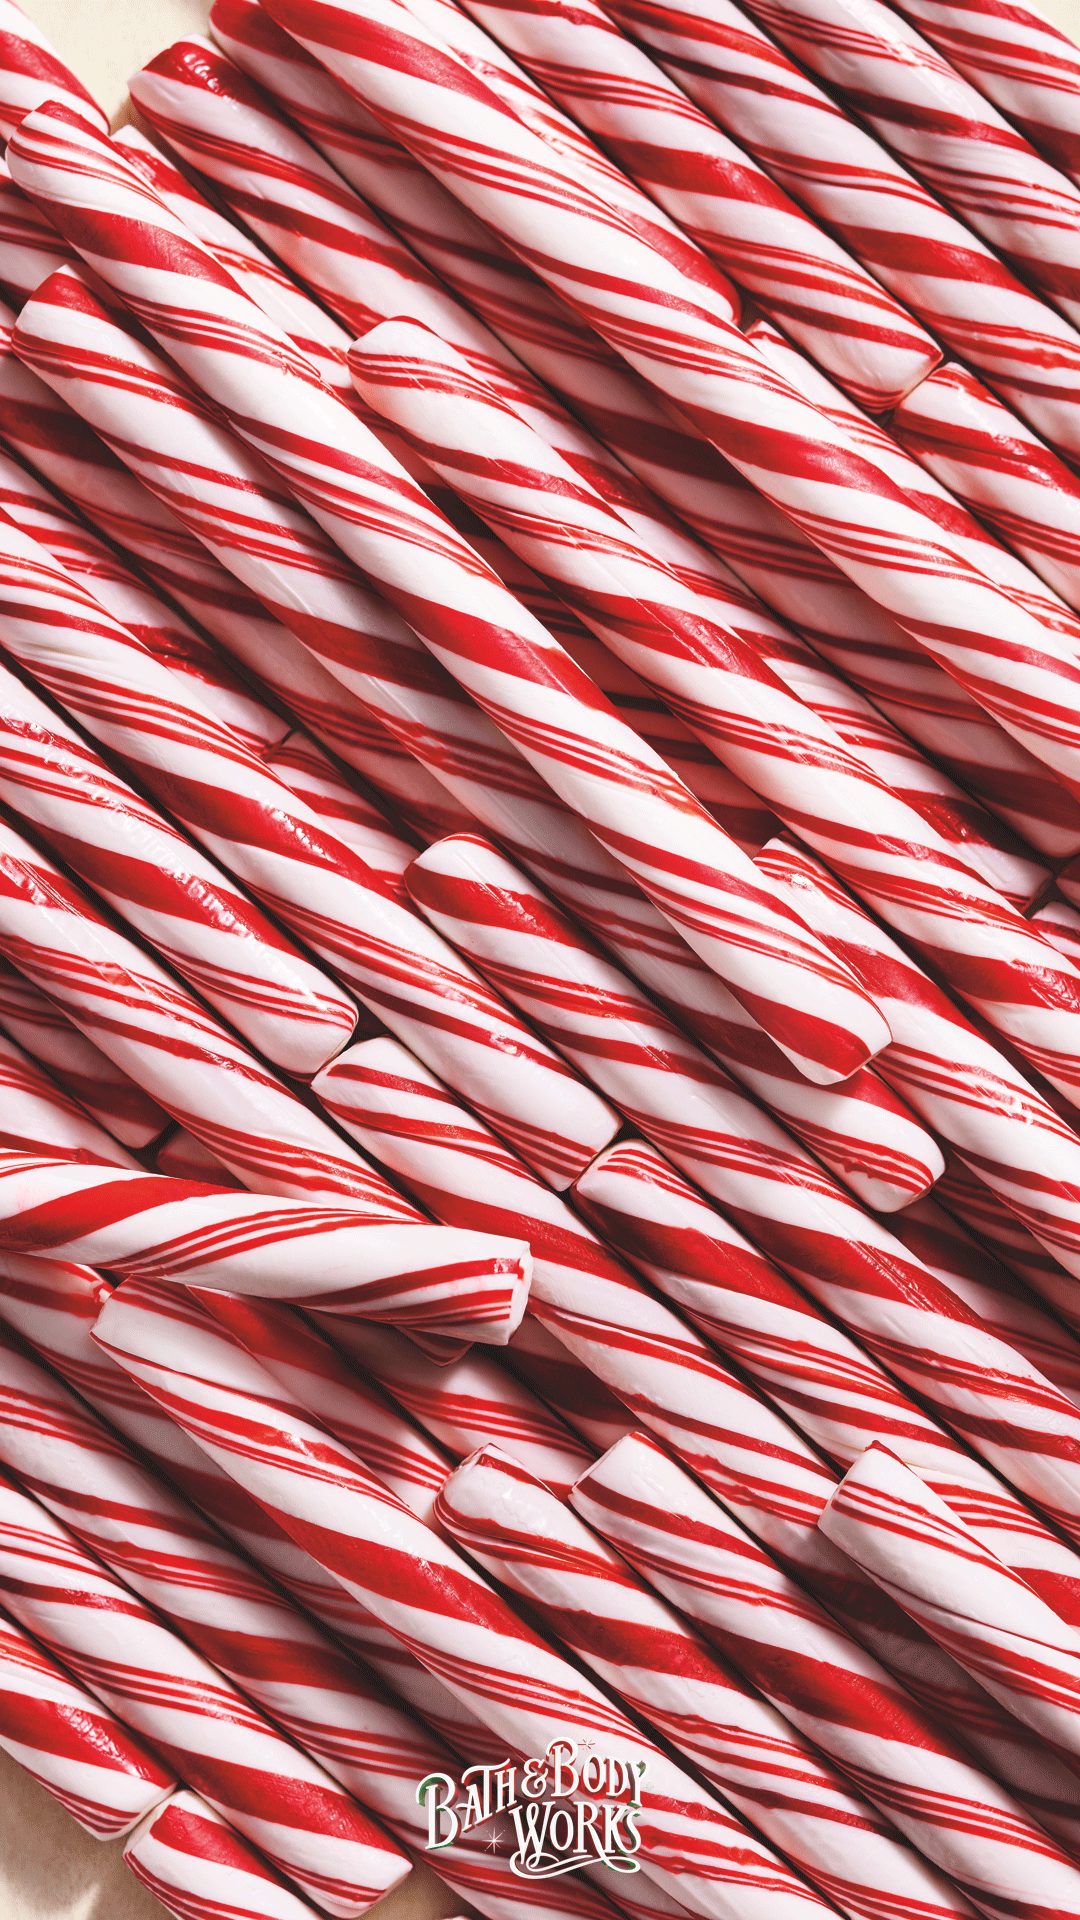 A pile of red and white candy canes. - Candy cane